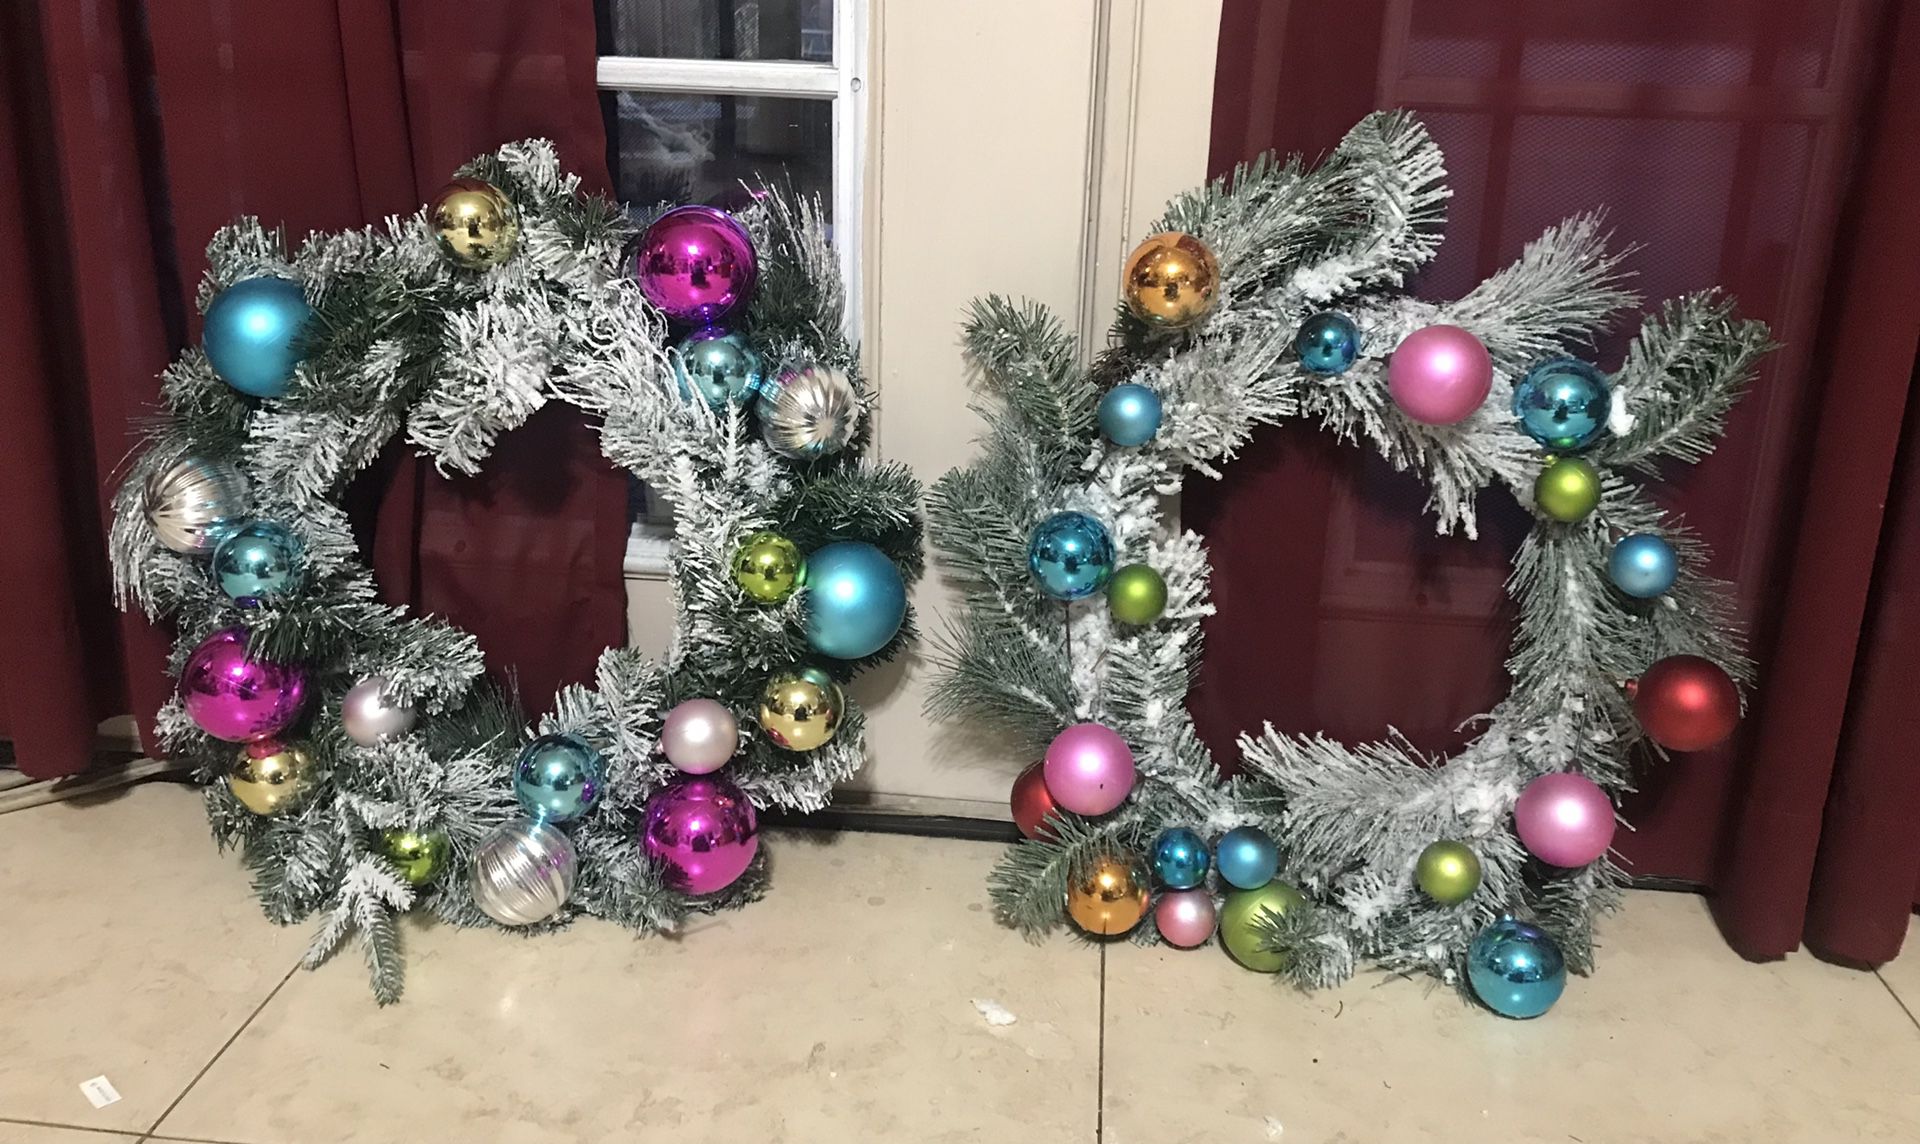 Brand new wreaths 2 For $25